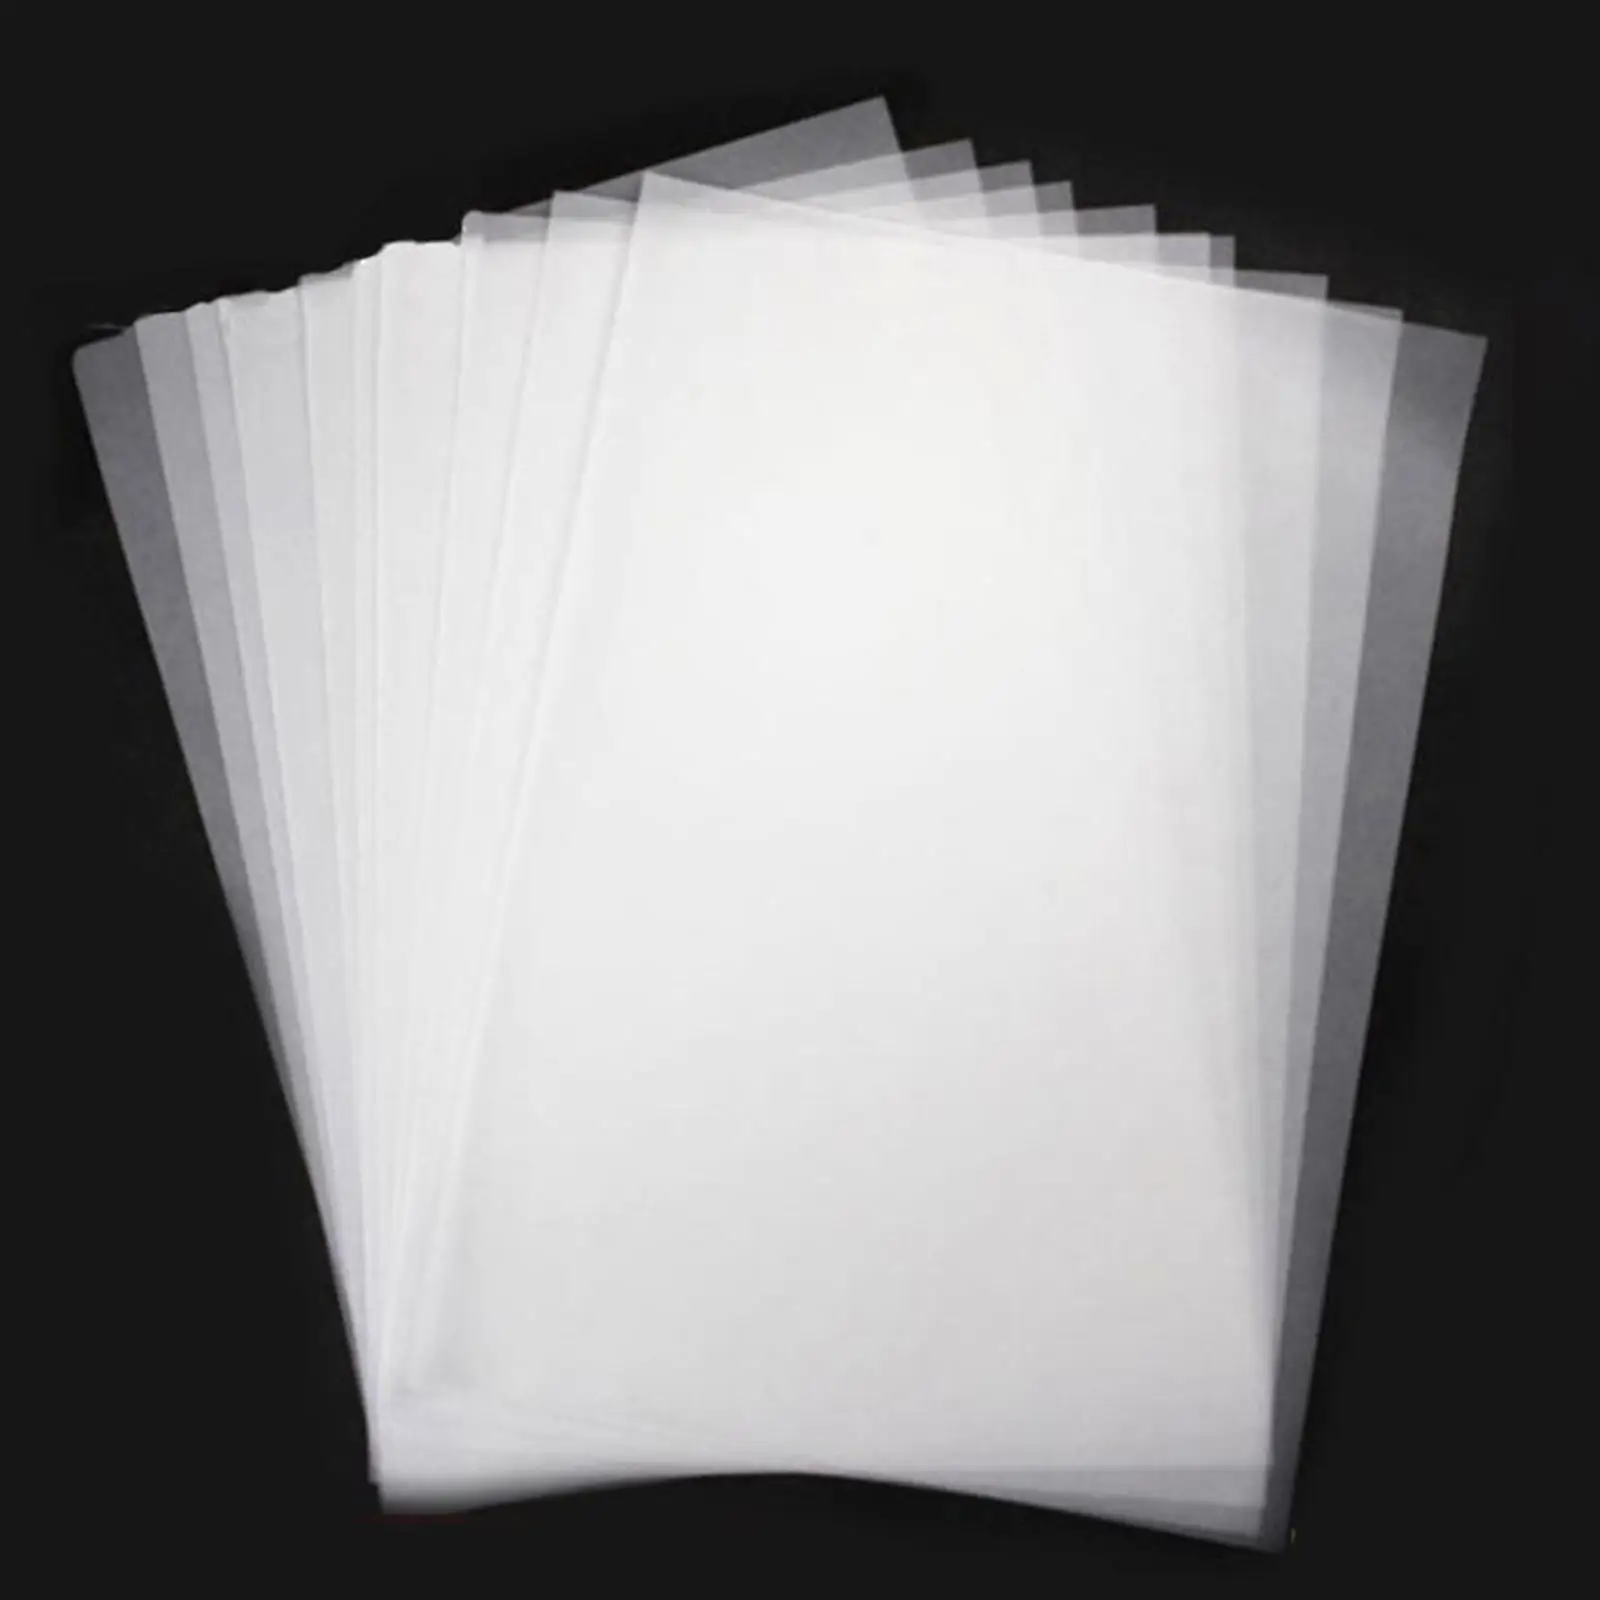 12 Sheets White Translucent Tracing Paper 6x Printing Sketching